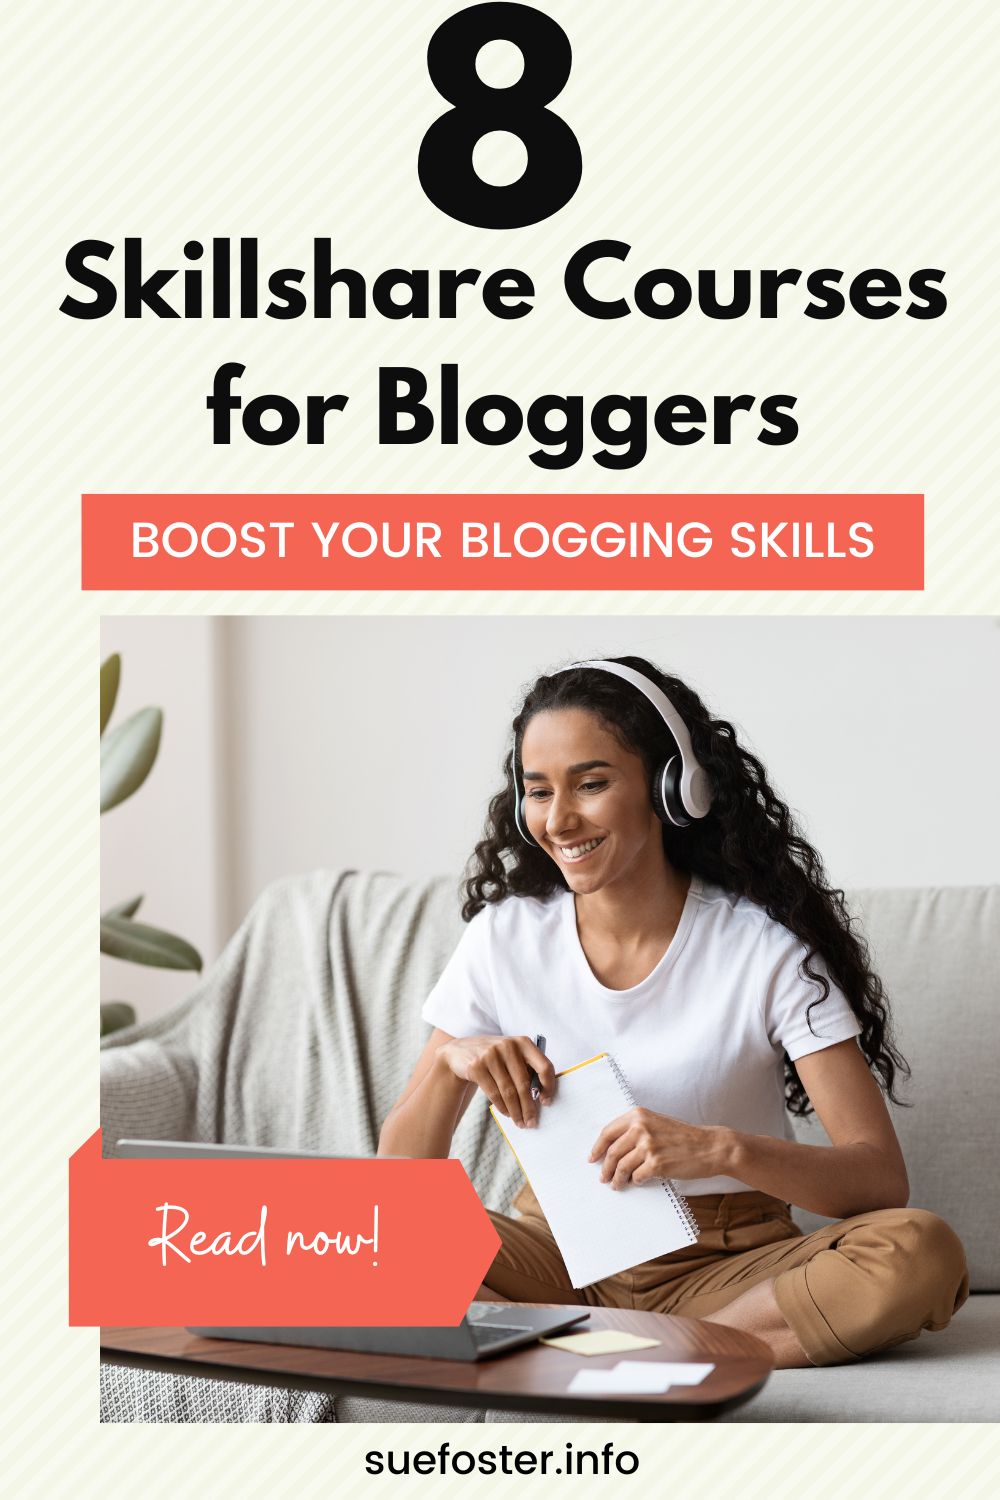 8 top Skillshare courses ideal for bloggers! From SEO to DSLR photography, boost your skills & take your blog to new heights.